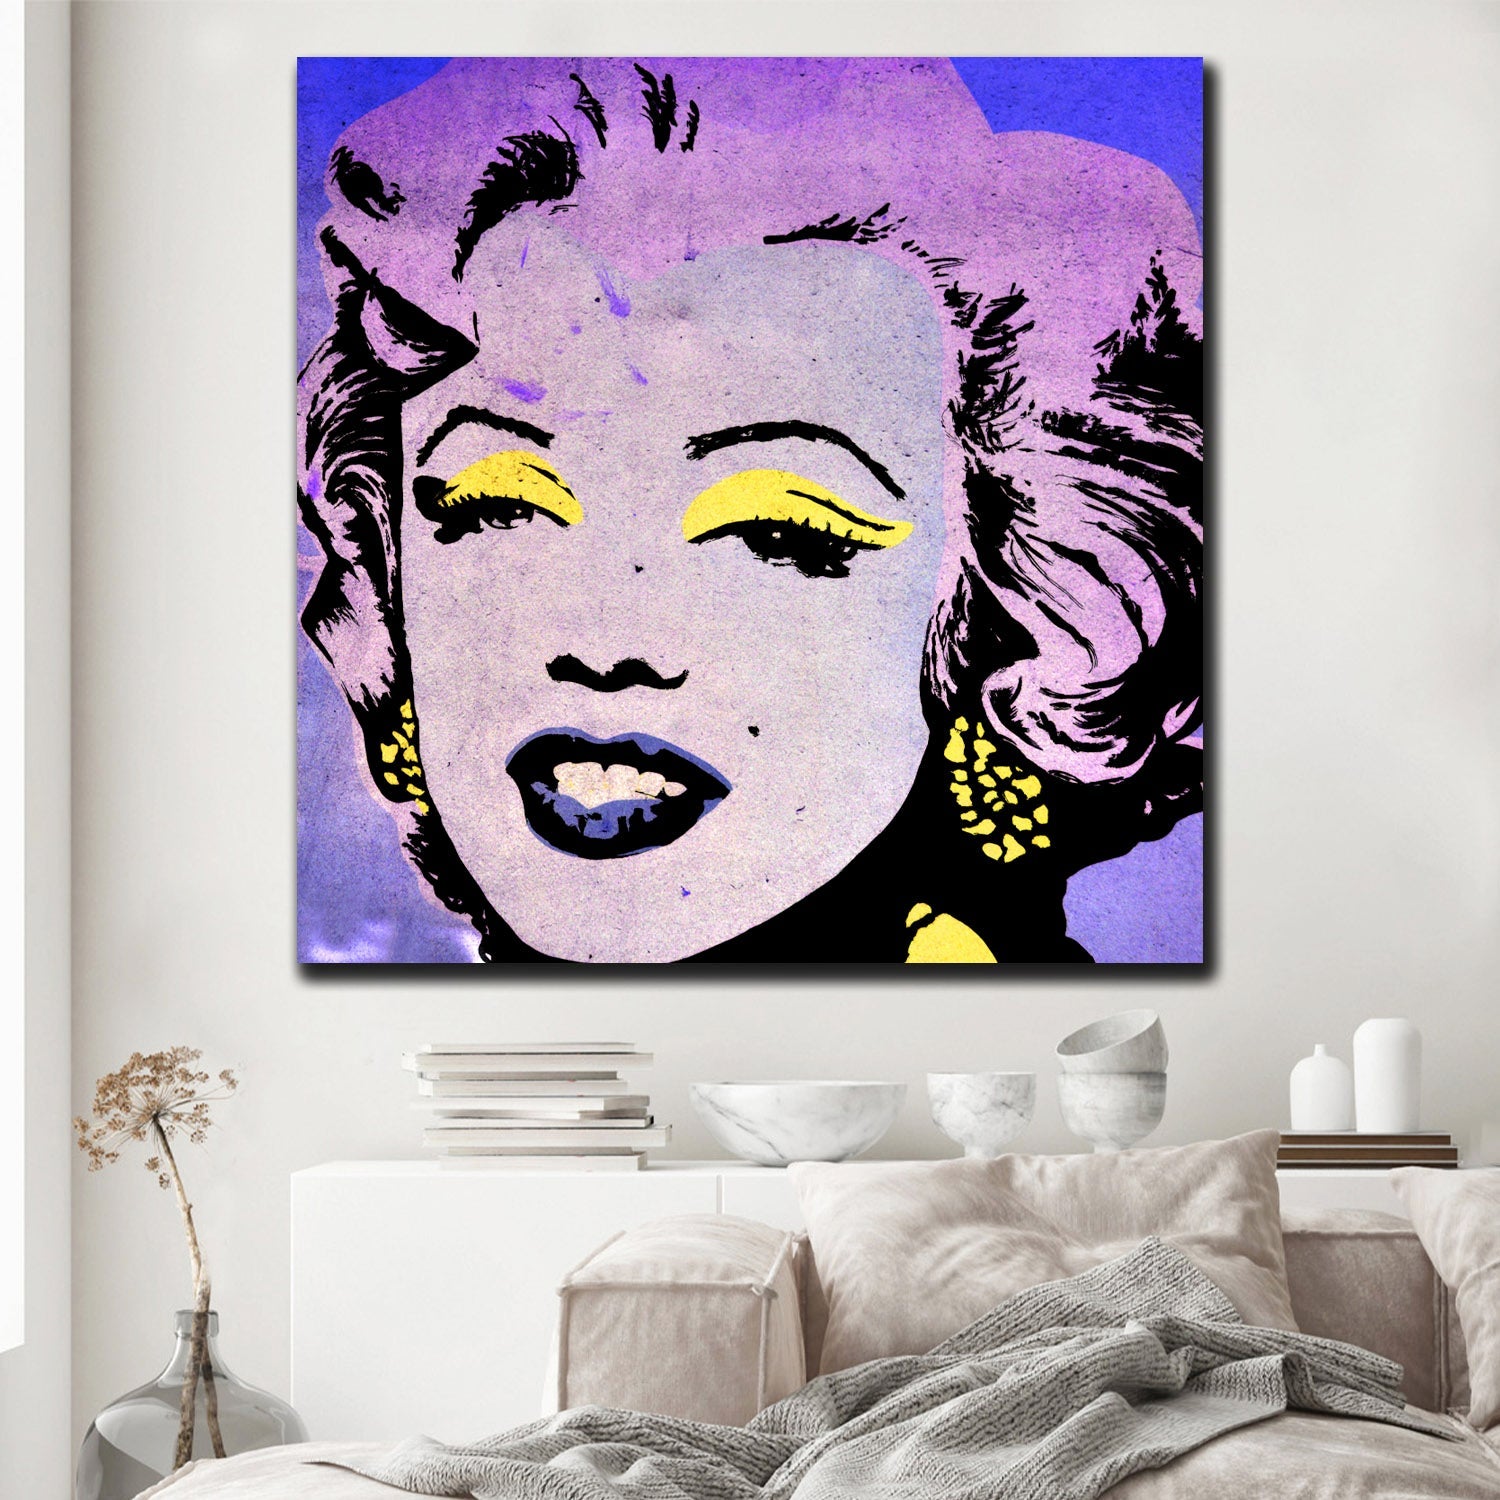 https://cdn.shopify.com/s/files/1/0387/9986/8044/products/ClassicMarilynCanvasArtprintStretched-2.jpg